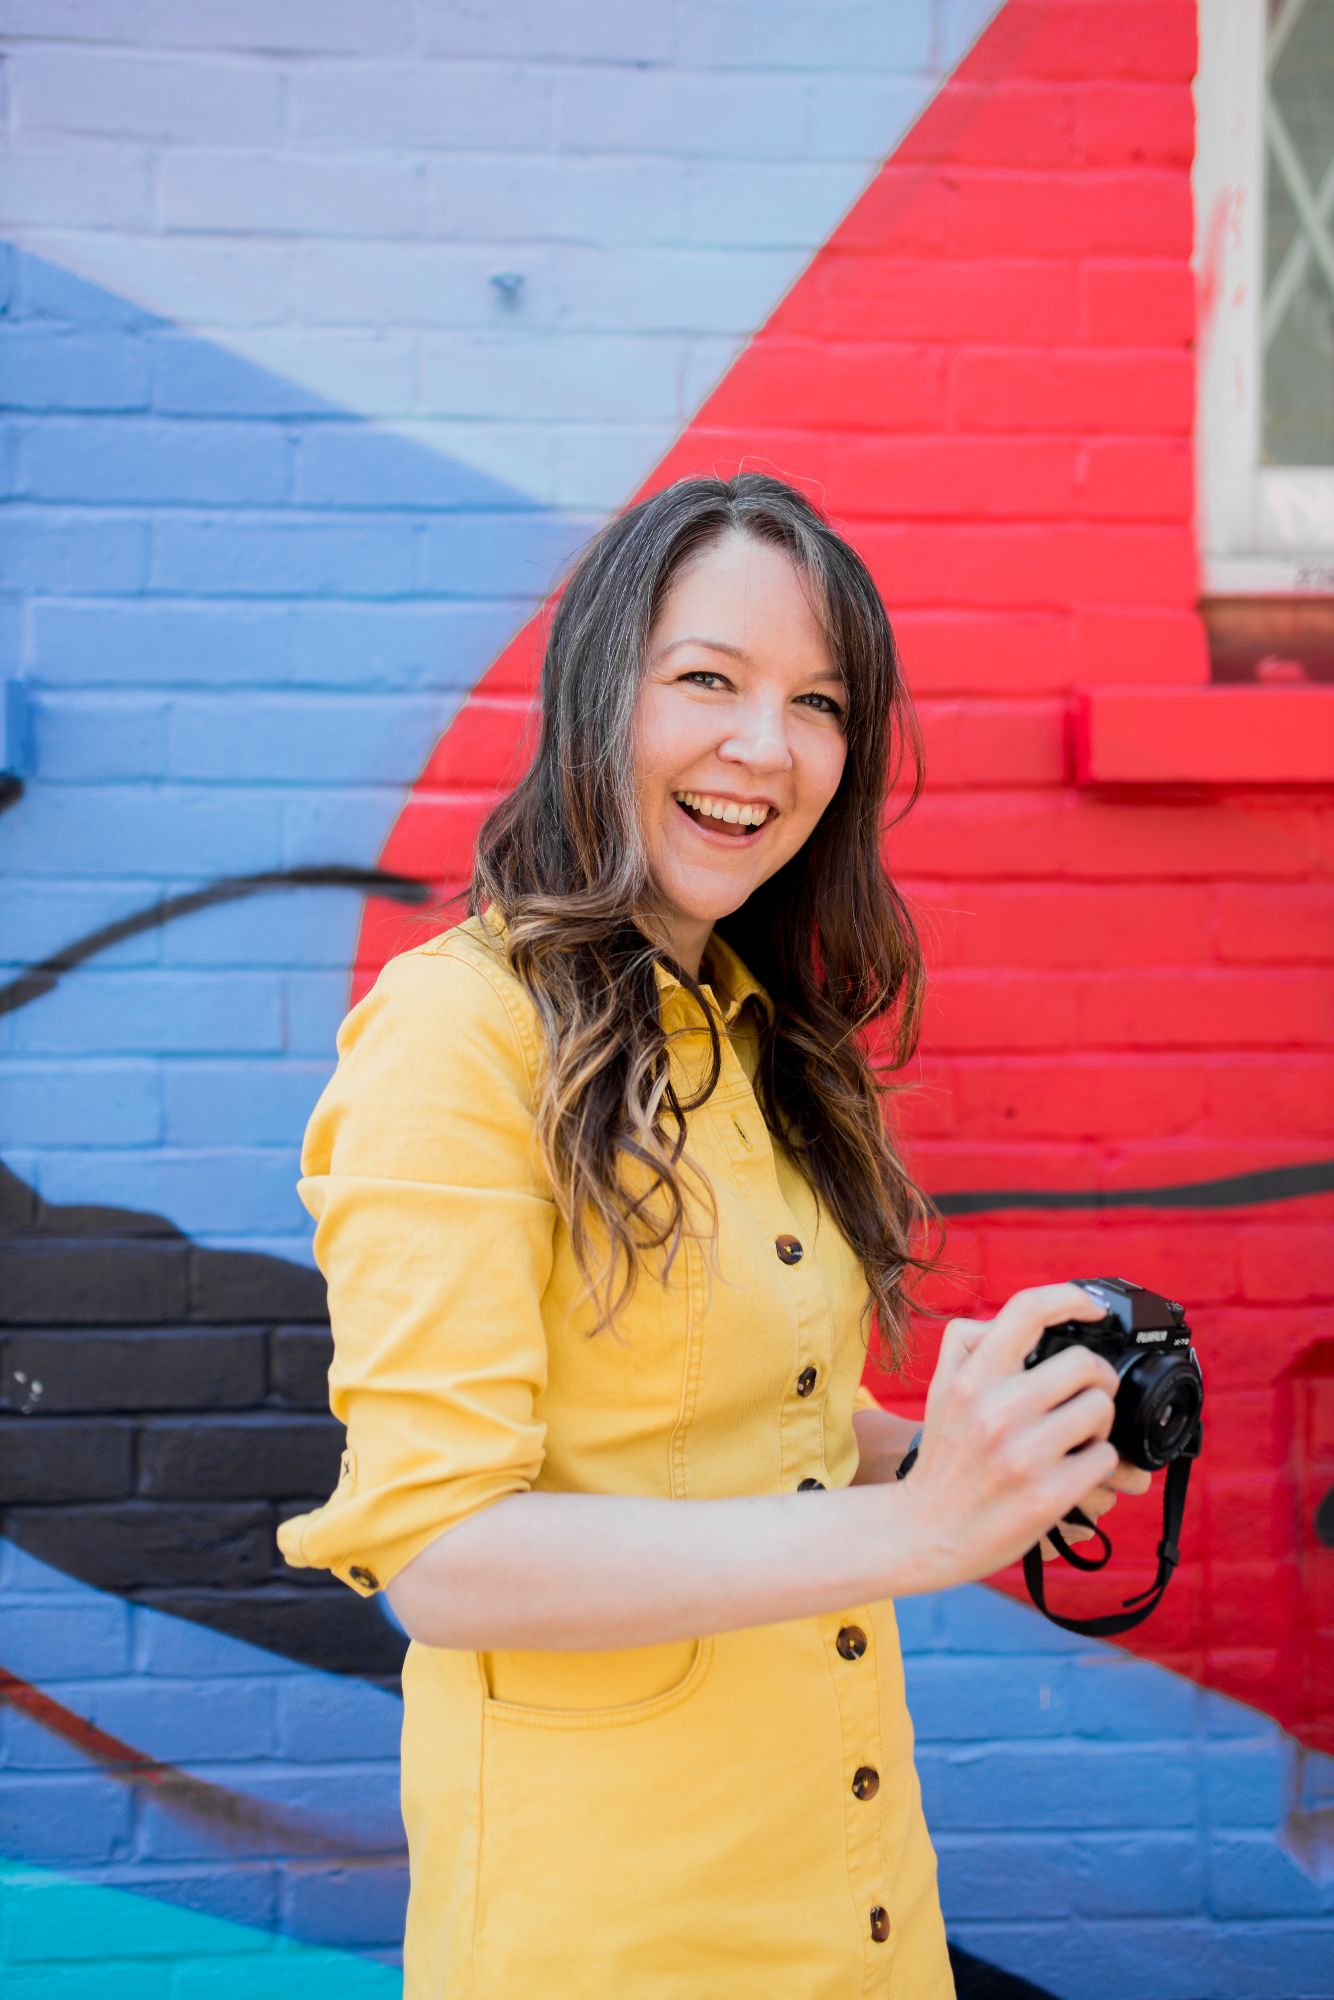 Brighton headshot photographer Lauren Psyk standing in front of a red and blue wall in a yellow dress holding her camera